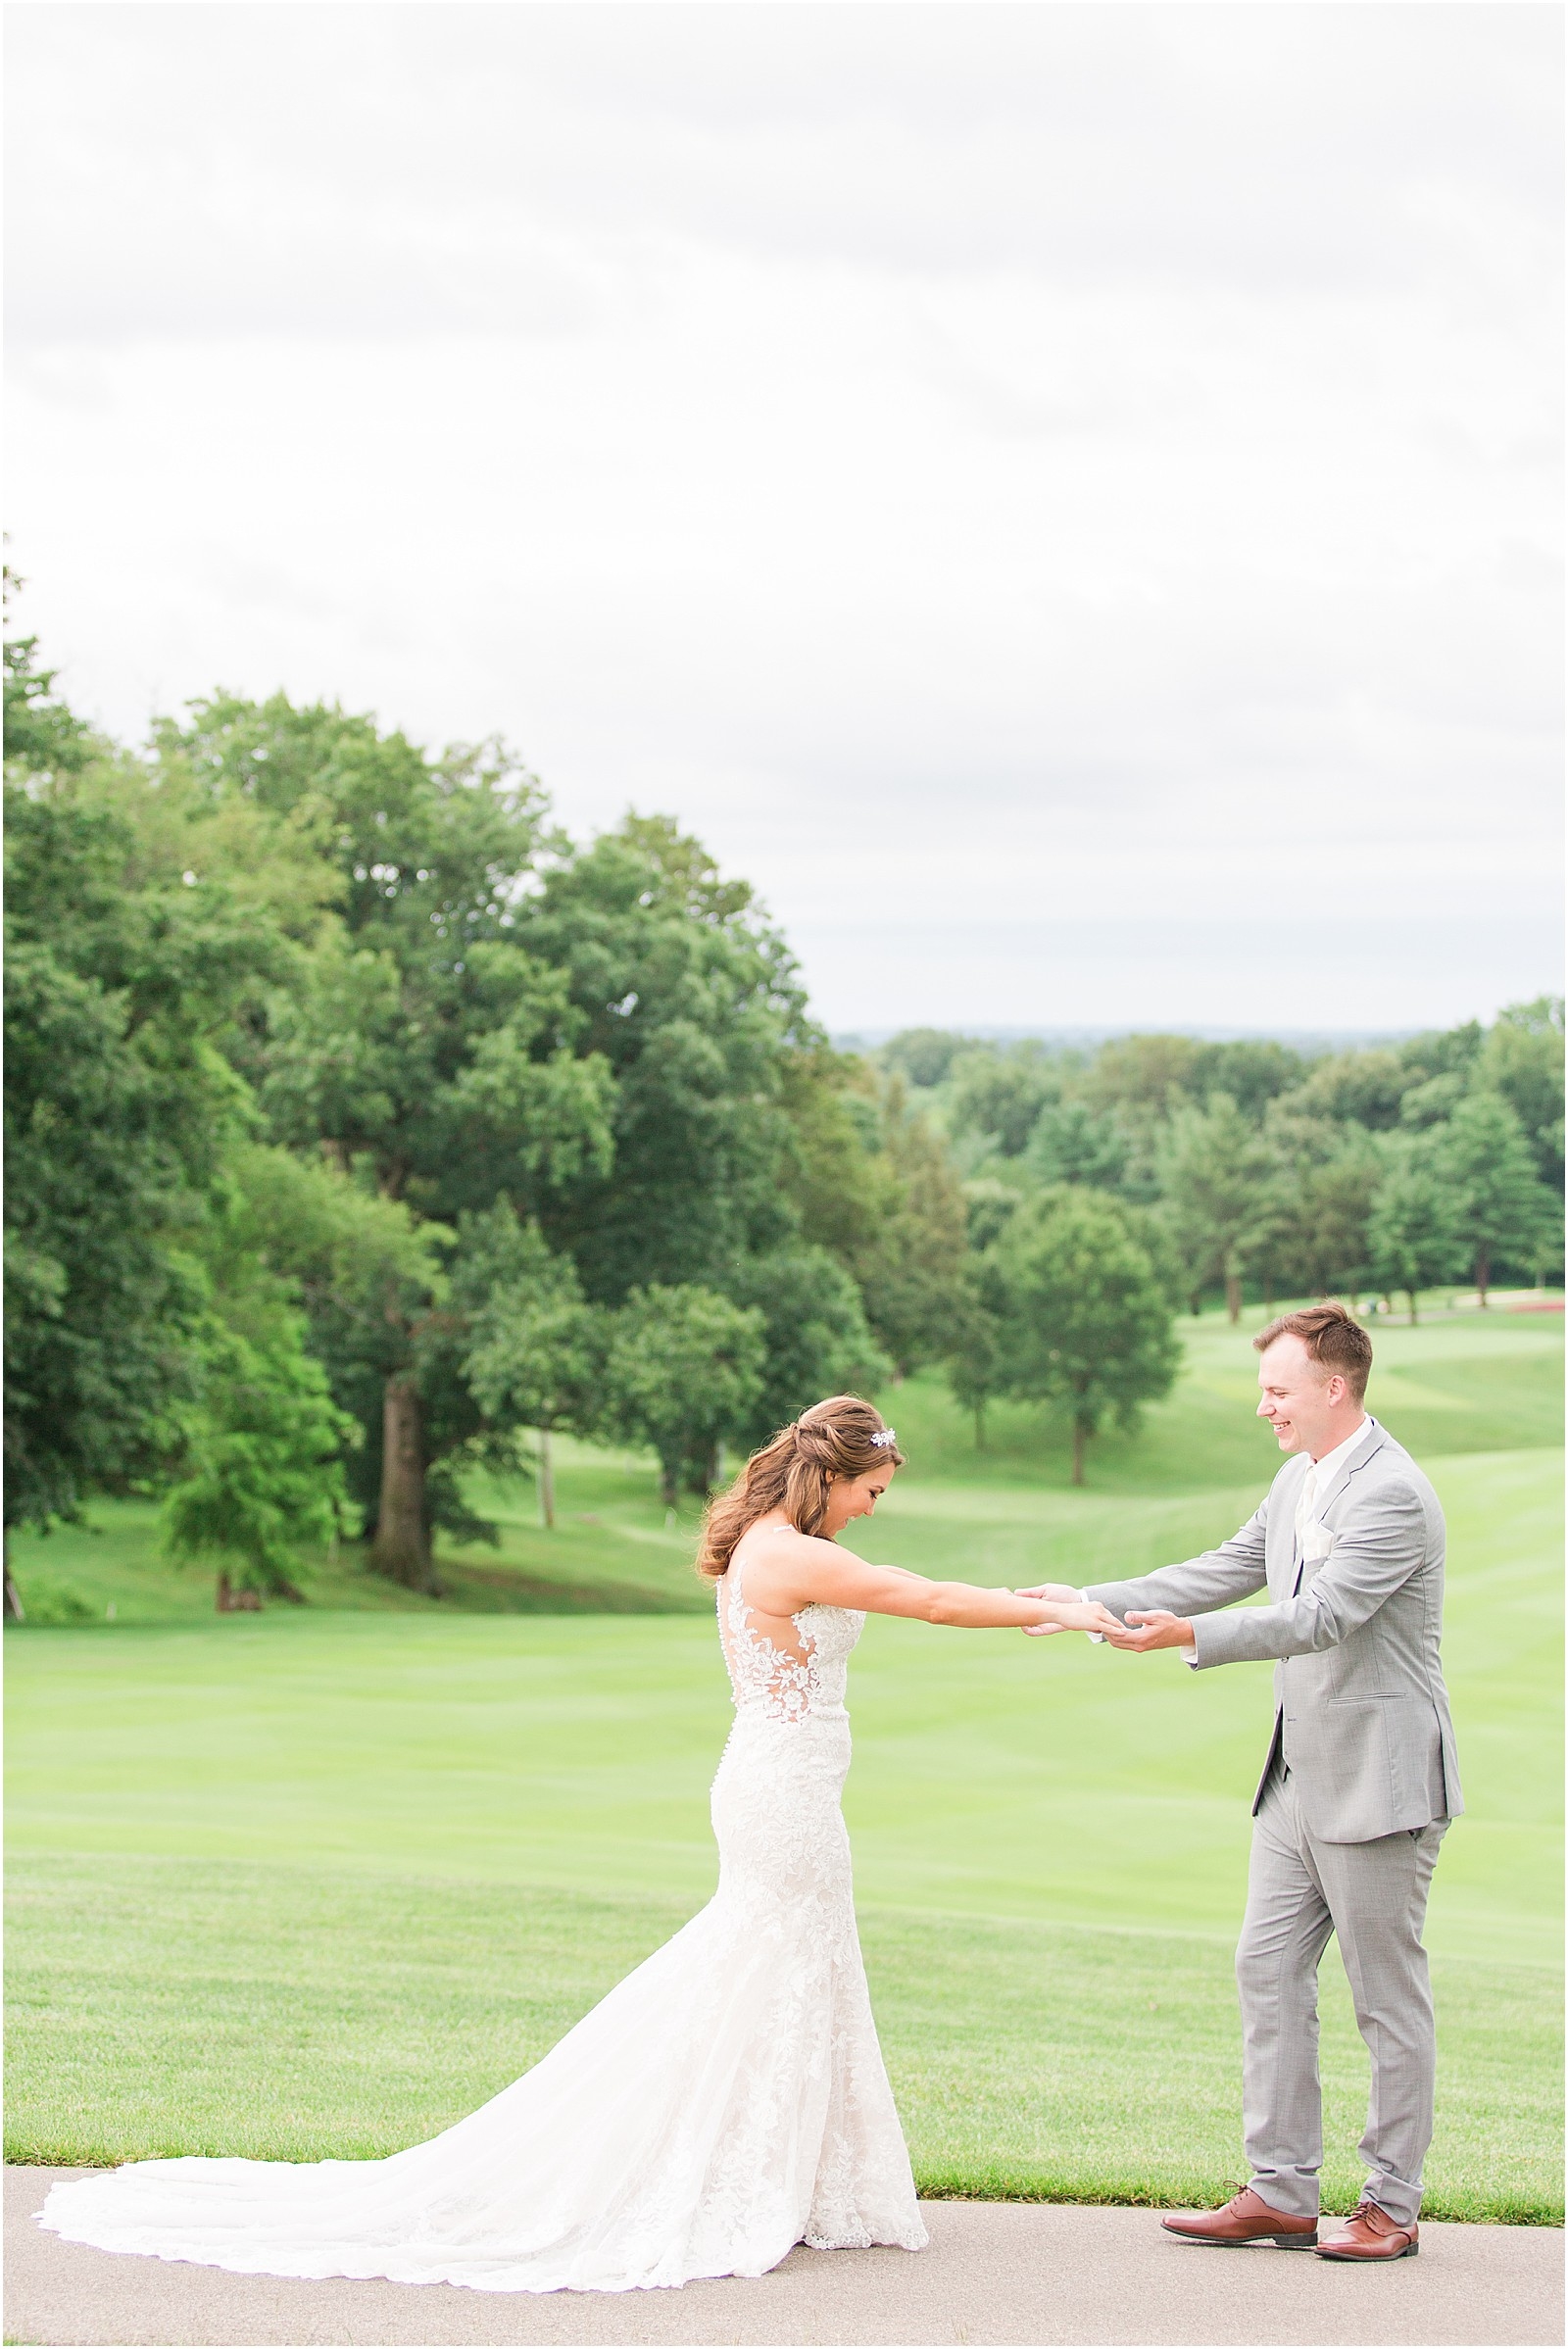 An Evansville County Club Wedding | Abby and Stratton 047.jpg